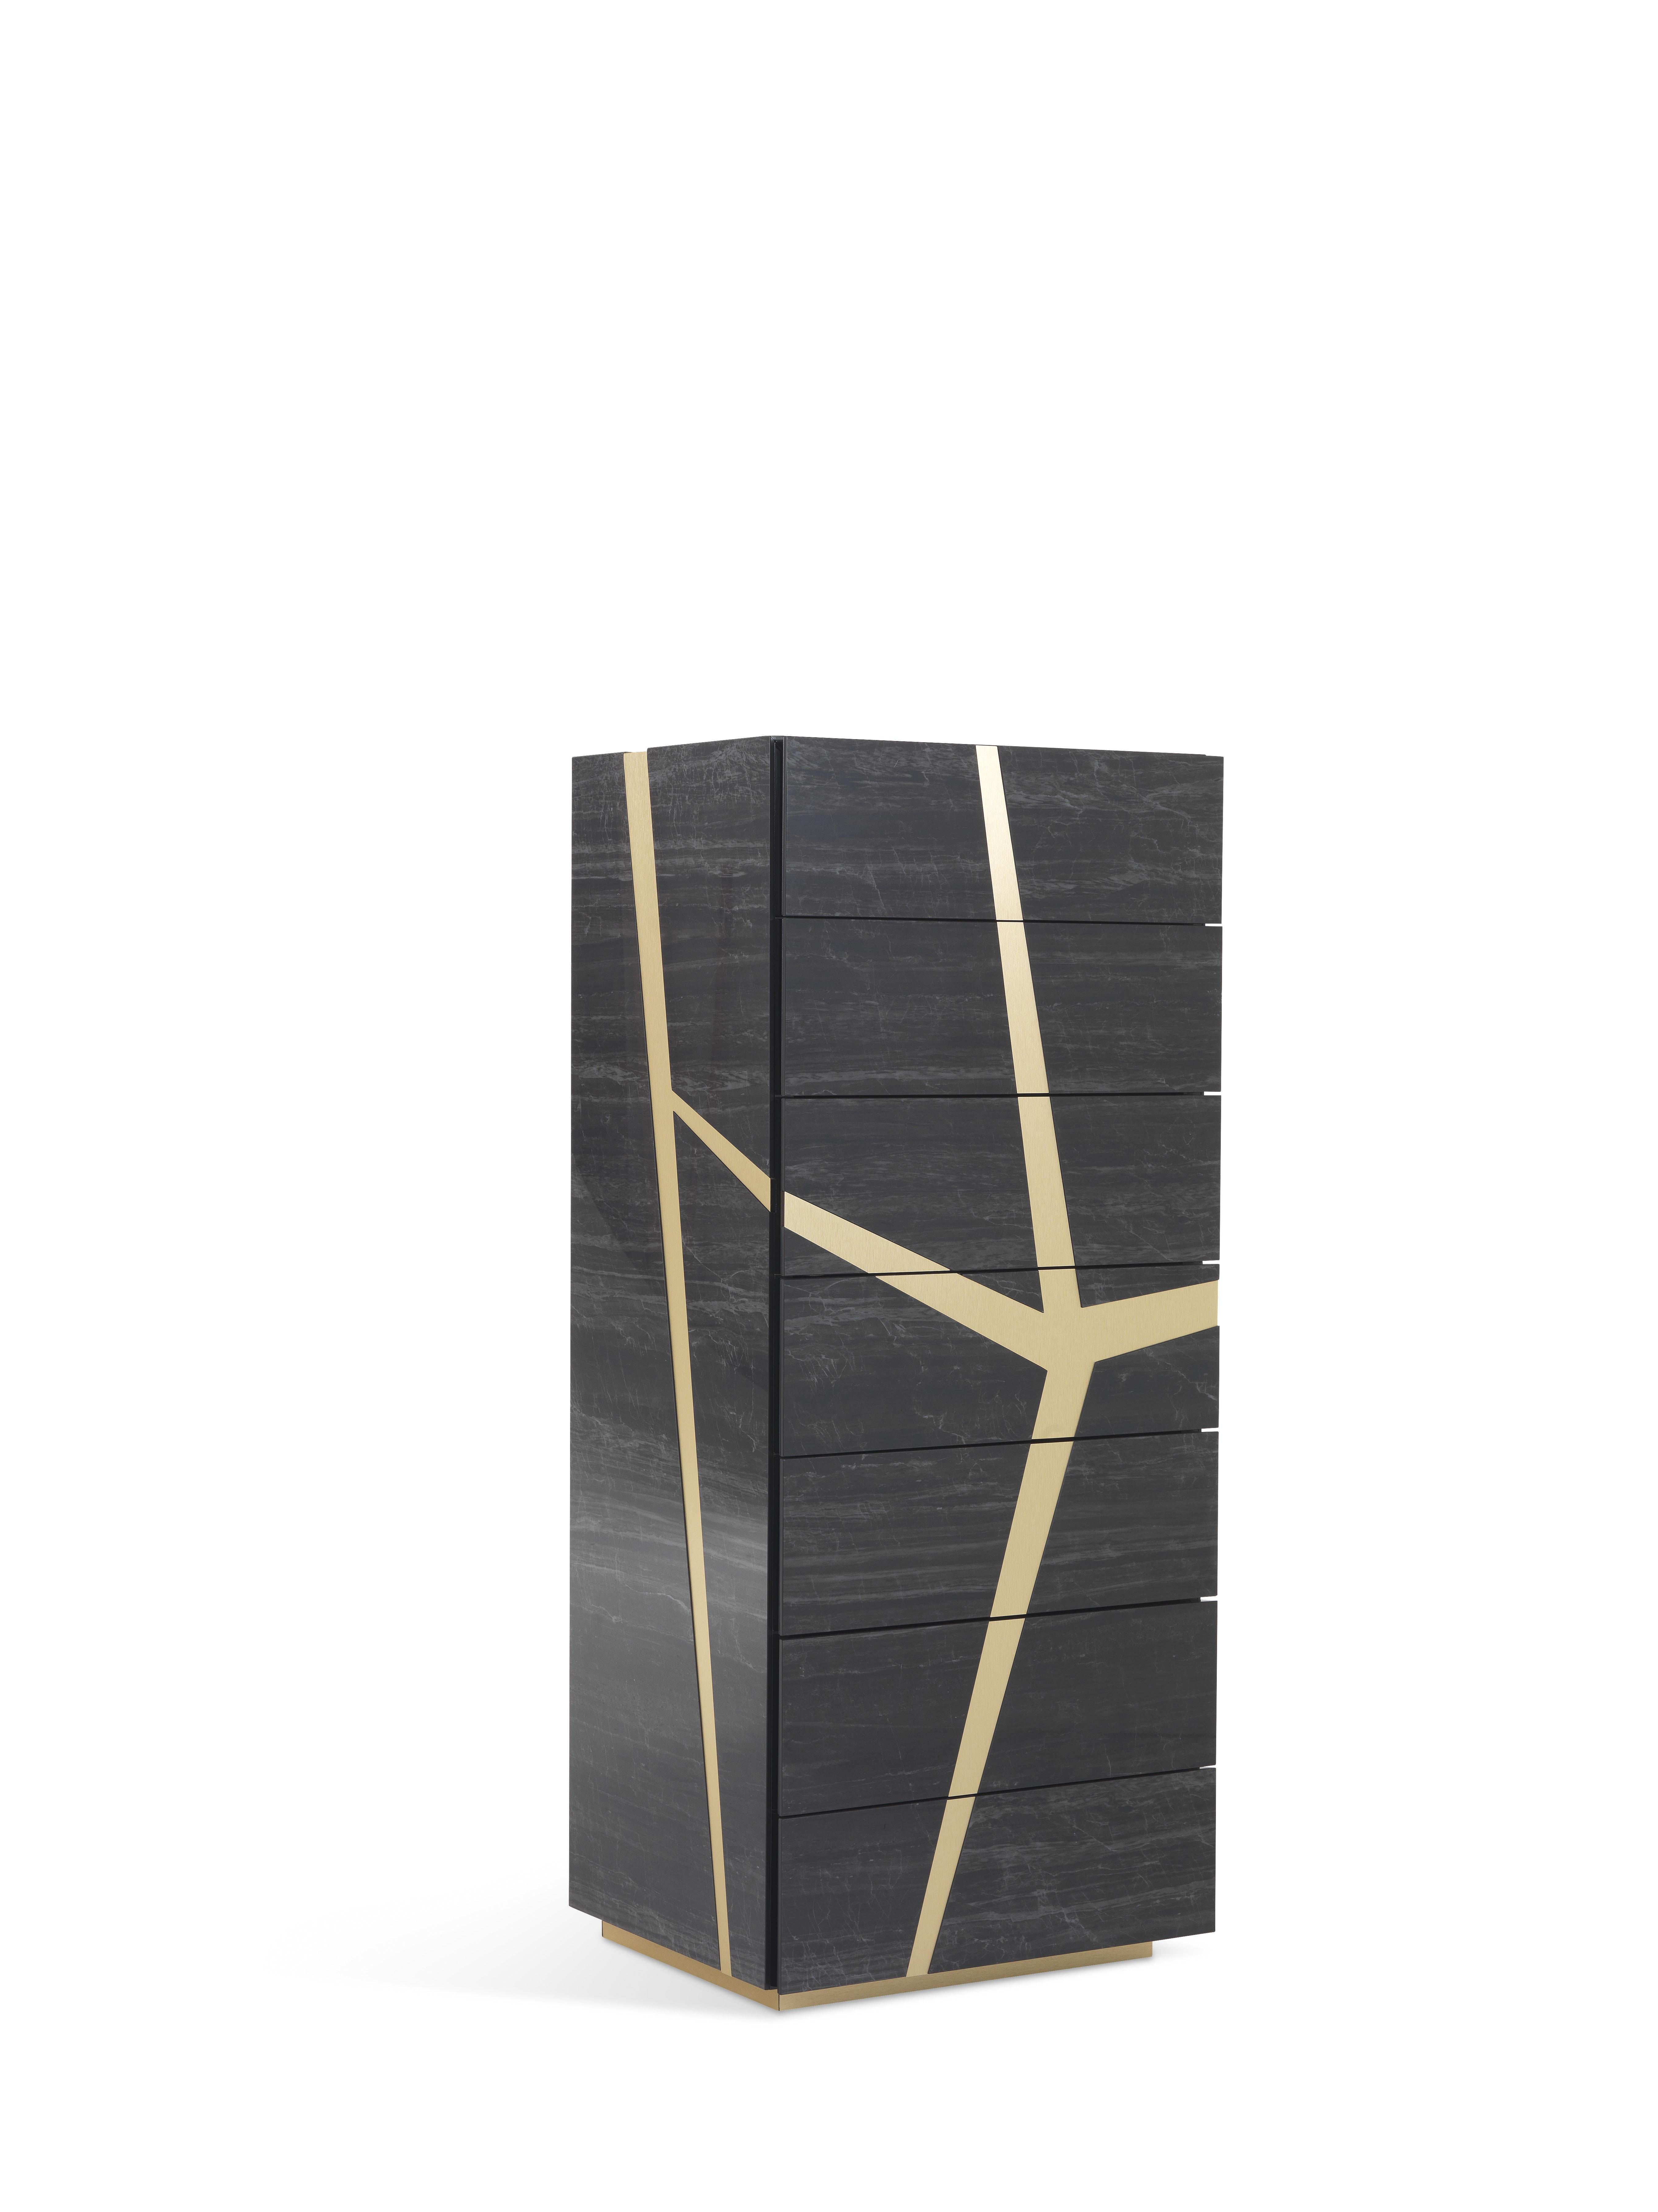 A chest of drawers with contemporary lines and vertical shape that combines functionality and aesthetic value. The piece of furniture is the result of a complex process of the craftsmanship of porcelain stoneware, enriched by metal inserts whose